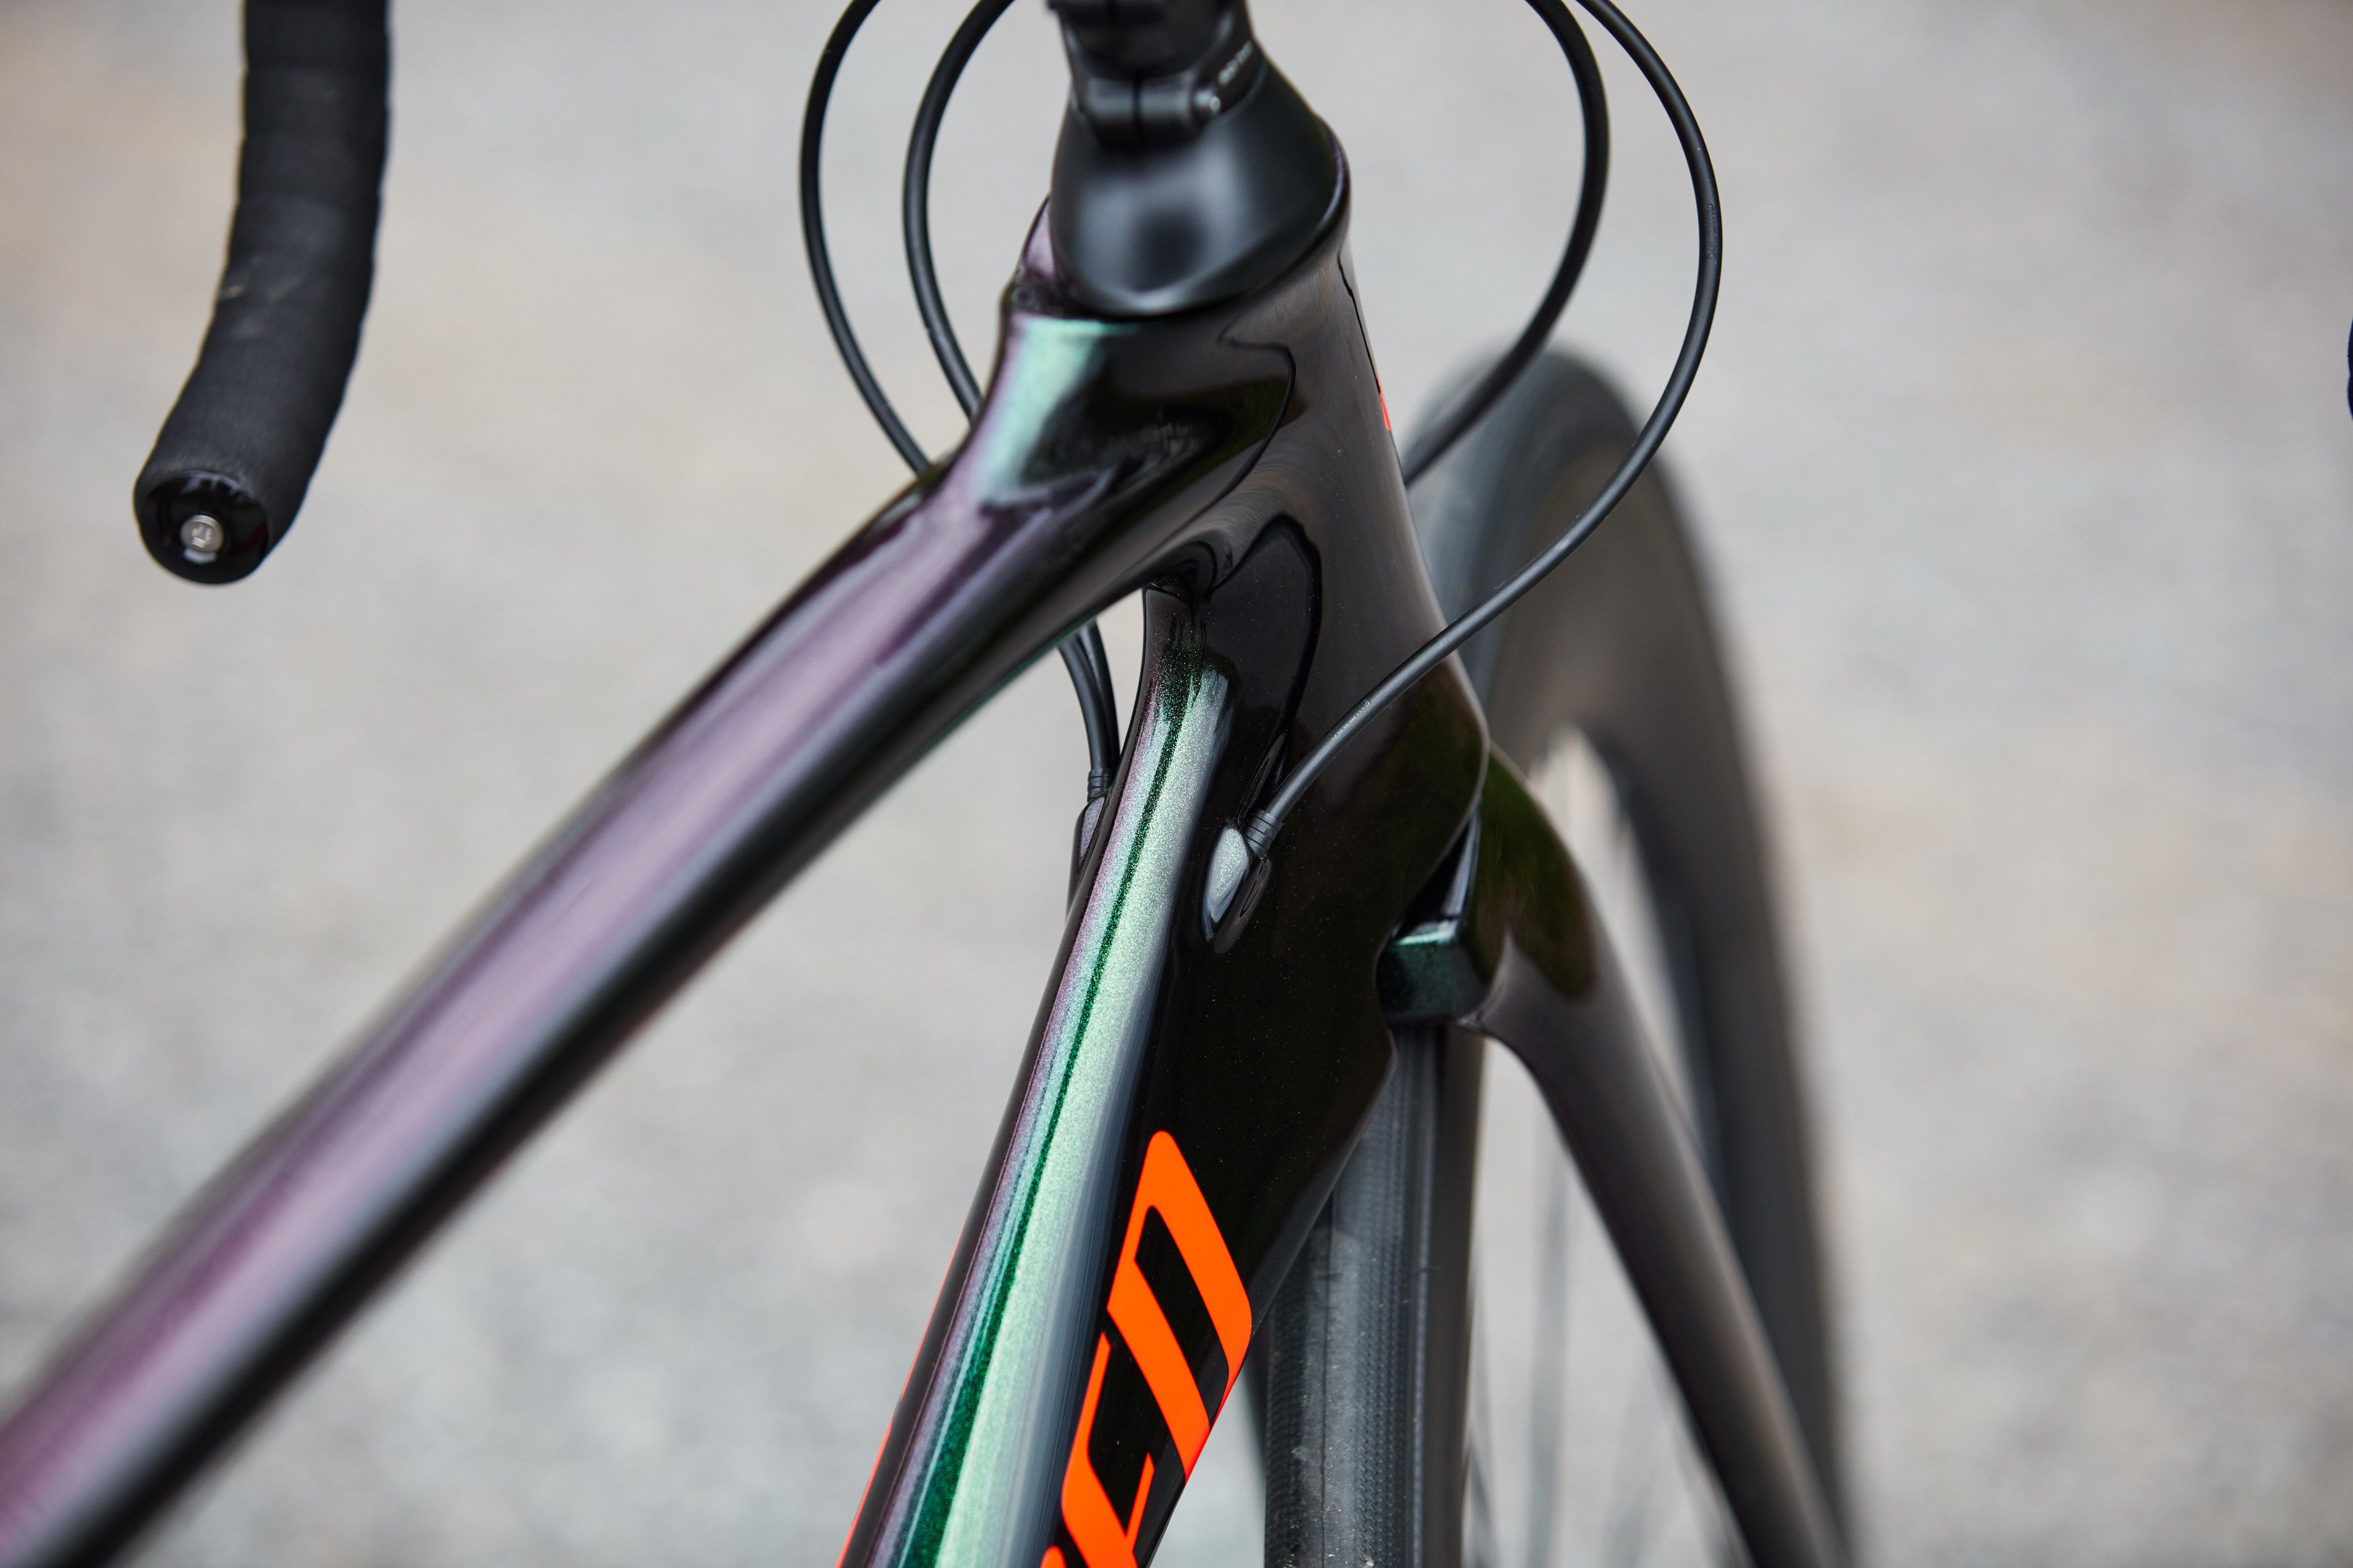 Specialized Venge Pro Disc Review - An Aero Road Bike We Love